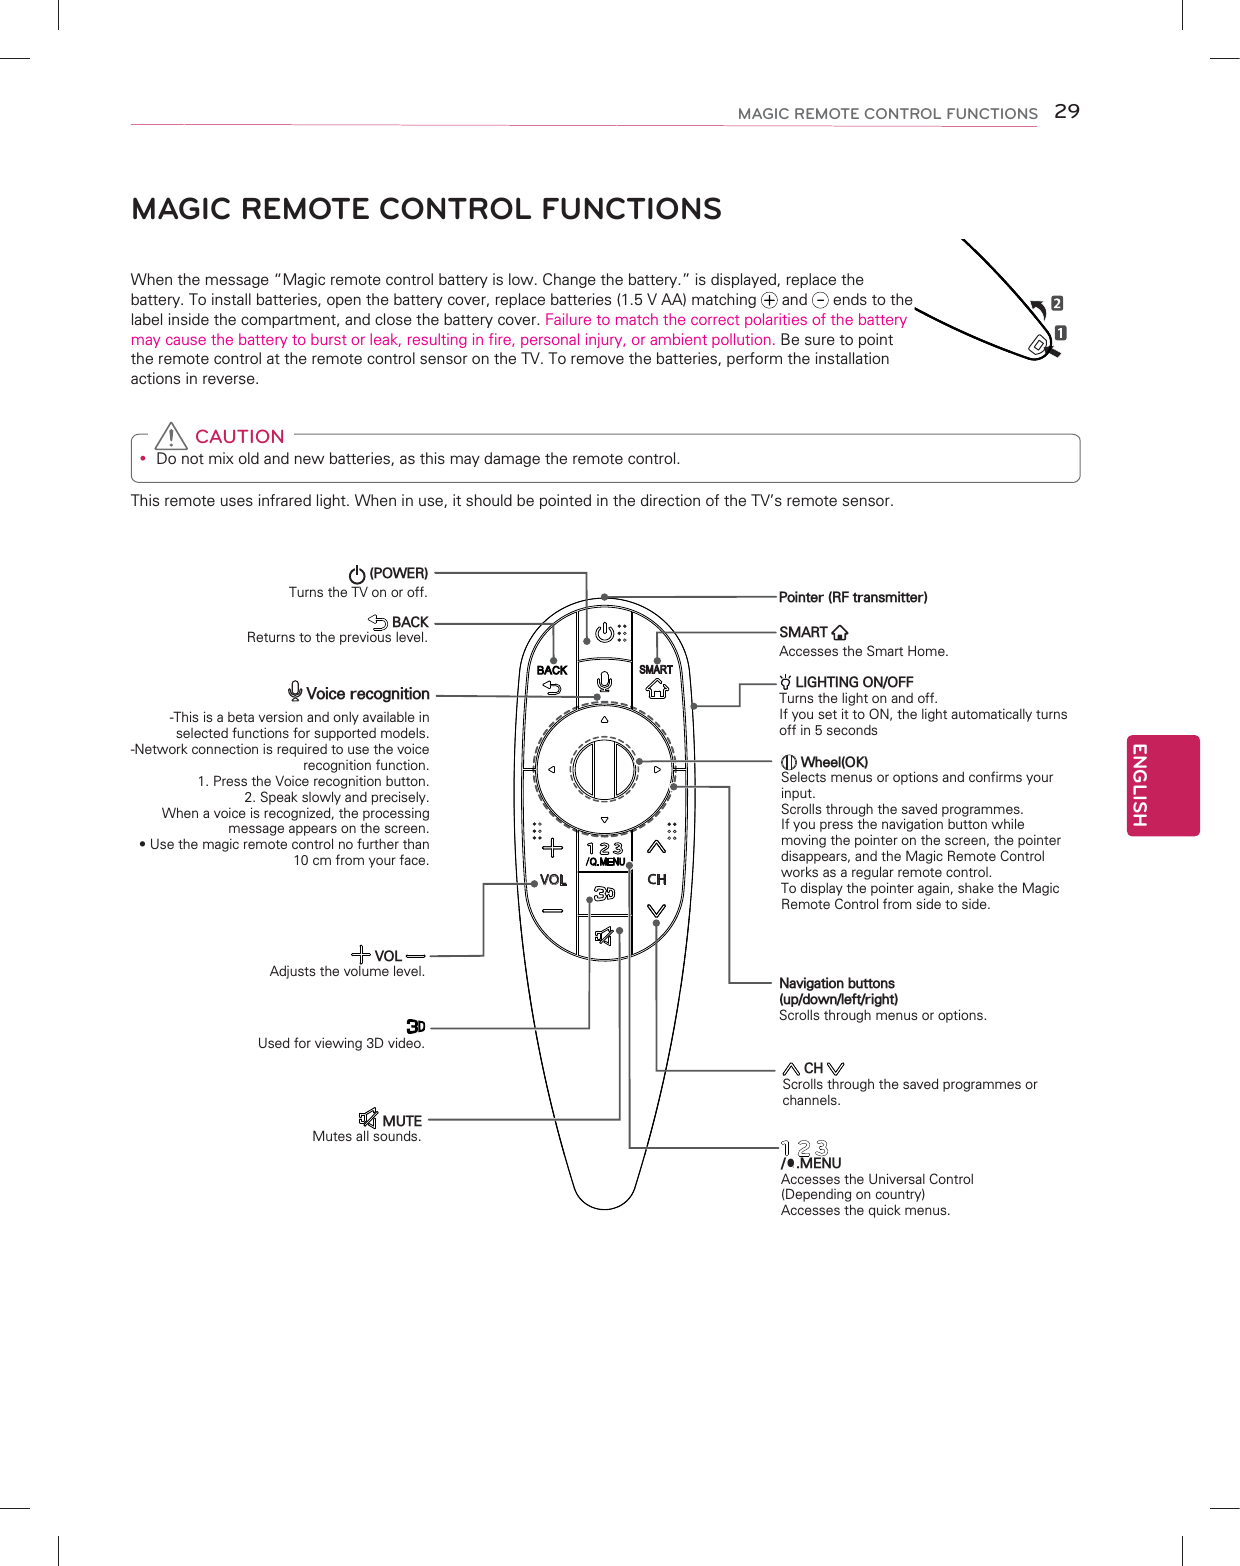 ENGLISH29MAGIC REMOTE CONTROL FUNCTIONSMAGIC REMOTE CONTROL FUNCTIONSWhen the message “Magic remote control battery is low. Change the battery.” is displayed, replace the battery. To install batteries, open the battery cover, replace batteries (1.5 V AA) matching   and   ends to the label inside the compartment, and close the battery cover. Failure to match the correct polarities of the battery may cause the battery to burst or leak, resulting in fire, personal injury, or ambient pollution. Be sure to point the remote control at the remote control sensor on the TV. To remove the batteries, perform the installation actions in reverse.y Do not mix old and new batteries, as this may damage the remote control. CAUTIONThis remote uses infrared light. When in use, it should be pointed in the direction of the TV’s remote sensor.VOL CH /Q.MENUAccesses the Universal Control (Depending on country)Accesses the quick menus. Wheel(OK)Selects menus or options and confirms your input. Scrolls through the saved programmes. If you press the navigation button while moving the pointer on the screen, the pointer disappears, and the Magic Remote Control works as a regular remote control. To display the pointer again, shake the Magic Remote Control from side to side. (POWER) Turns the TV on or off.Used for viewing 3D video. BACK Returns to the previous level. CH Scrolls through the saved programmes or channels.Navigation buttons (up/down/left/right) Scrolls through menus or options. MUTEMutes all sounds. VOL Adjusts the volume level. Voice recognition-This is a beta version and only available in selected functions for supported models. -Network connection is required to use the voice recognition function.1. Press the Voice recognition button.2. Speak slowly and precisely.  When a voice is recognized, the processing message appears on the screen.10 cm from your face.SMART   Accesses the Smart Home.Pointer (RF transmitter) LIGHTING ON/OFFTurns the light on and off.If you set it to ON, the light automatically turns off in 5 seconds